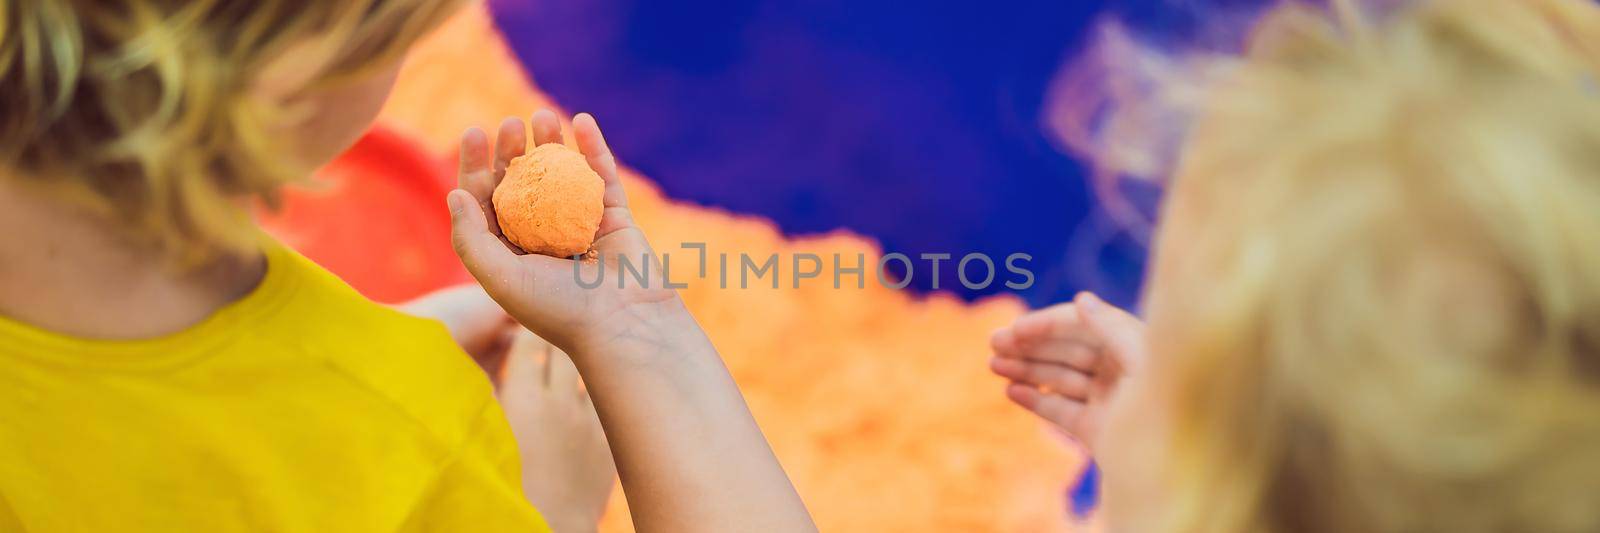 Boy and girl play with kinetic sand. BANNER, LONG FORMAT